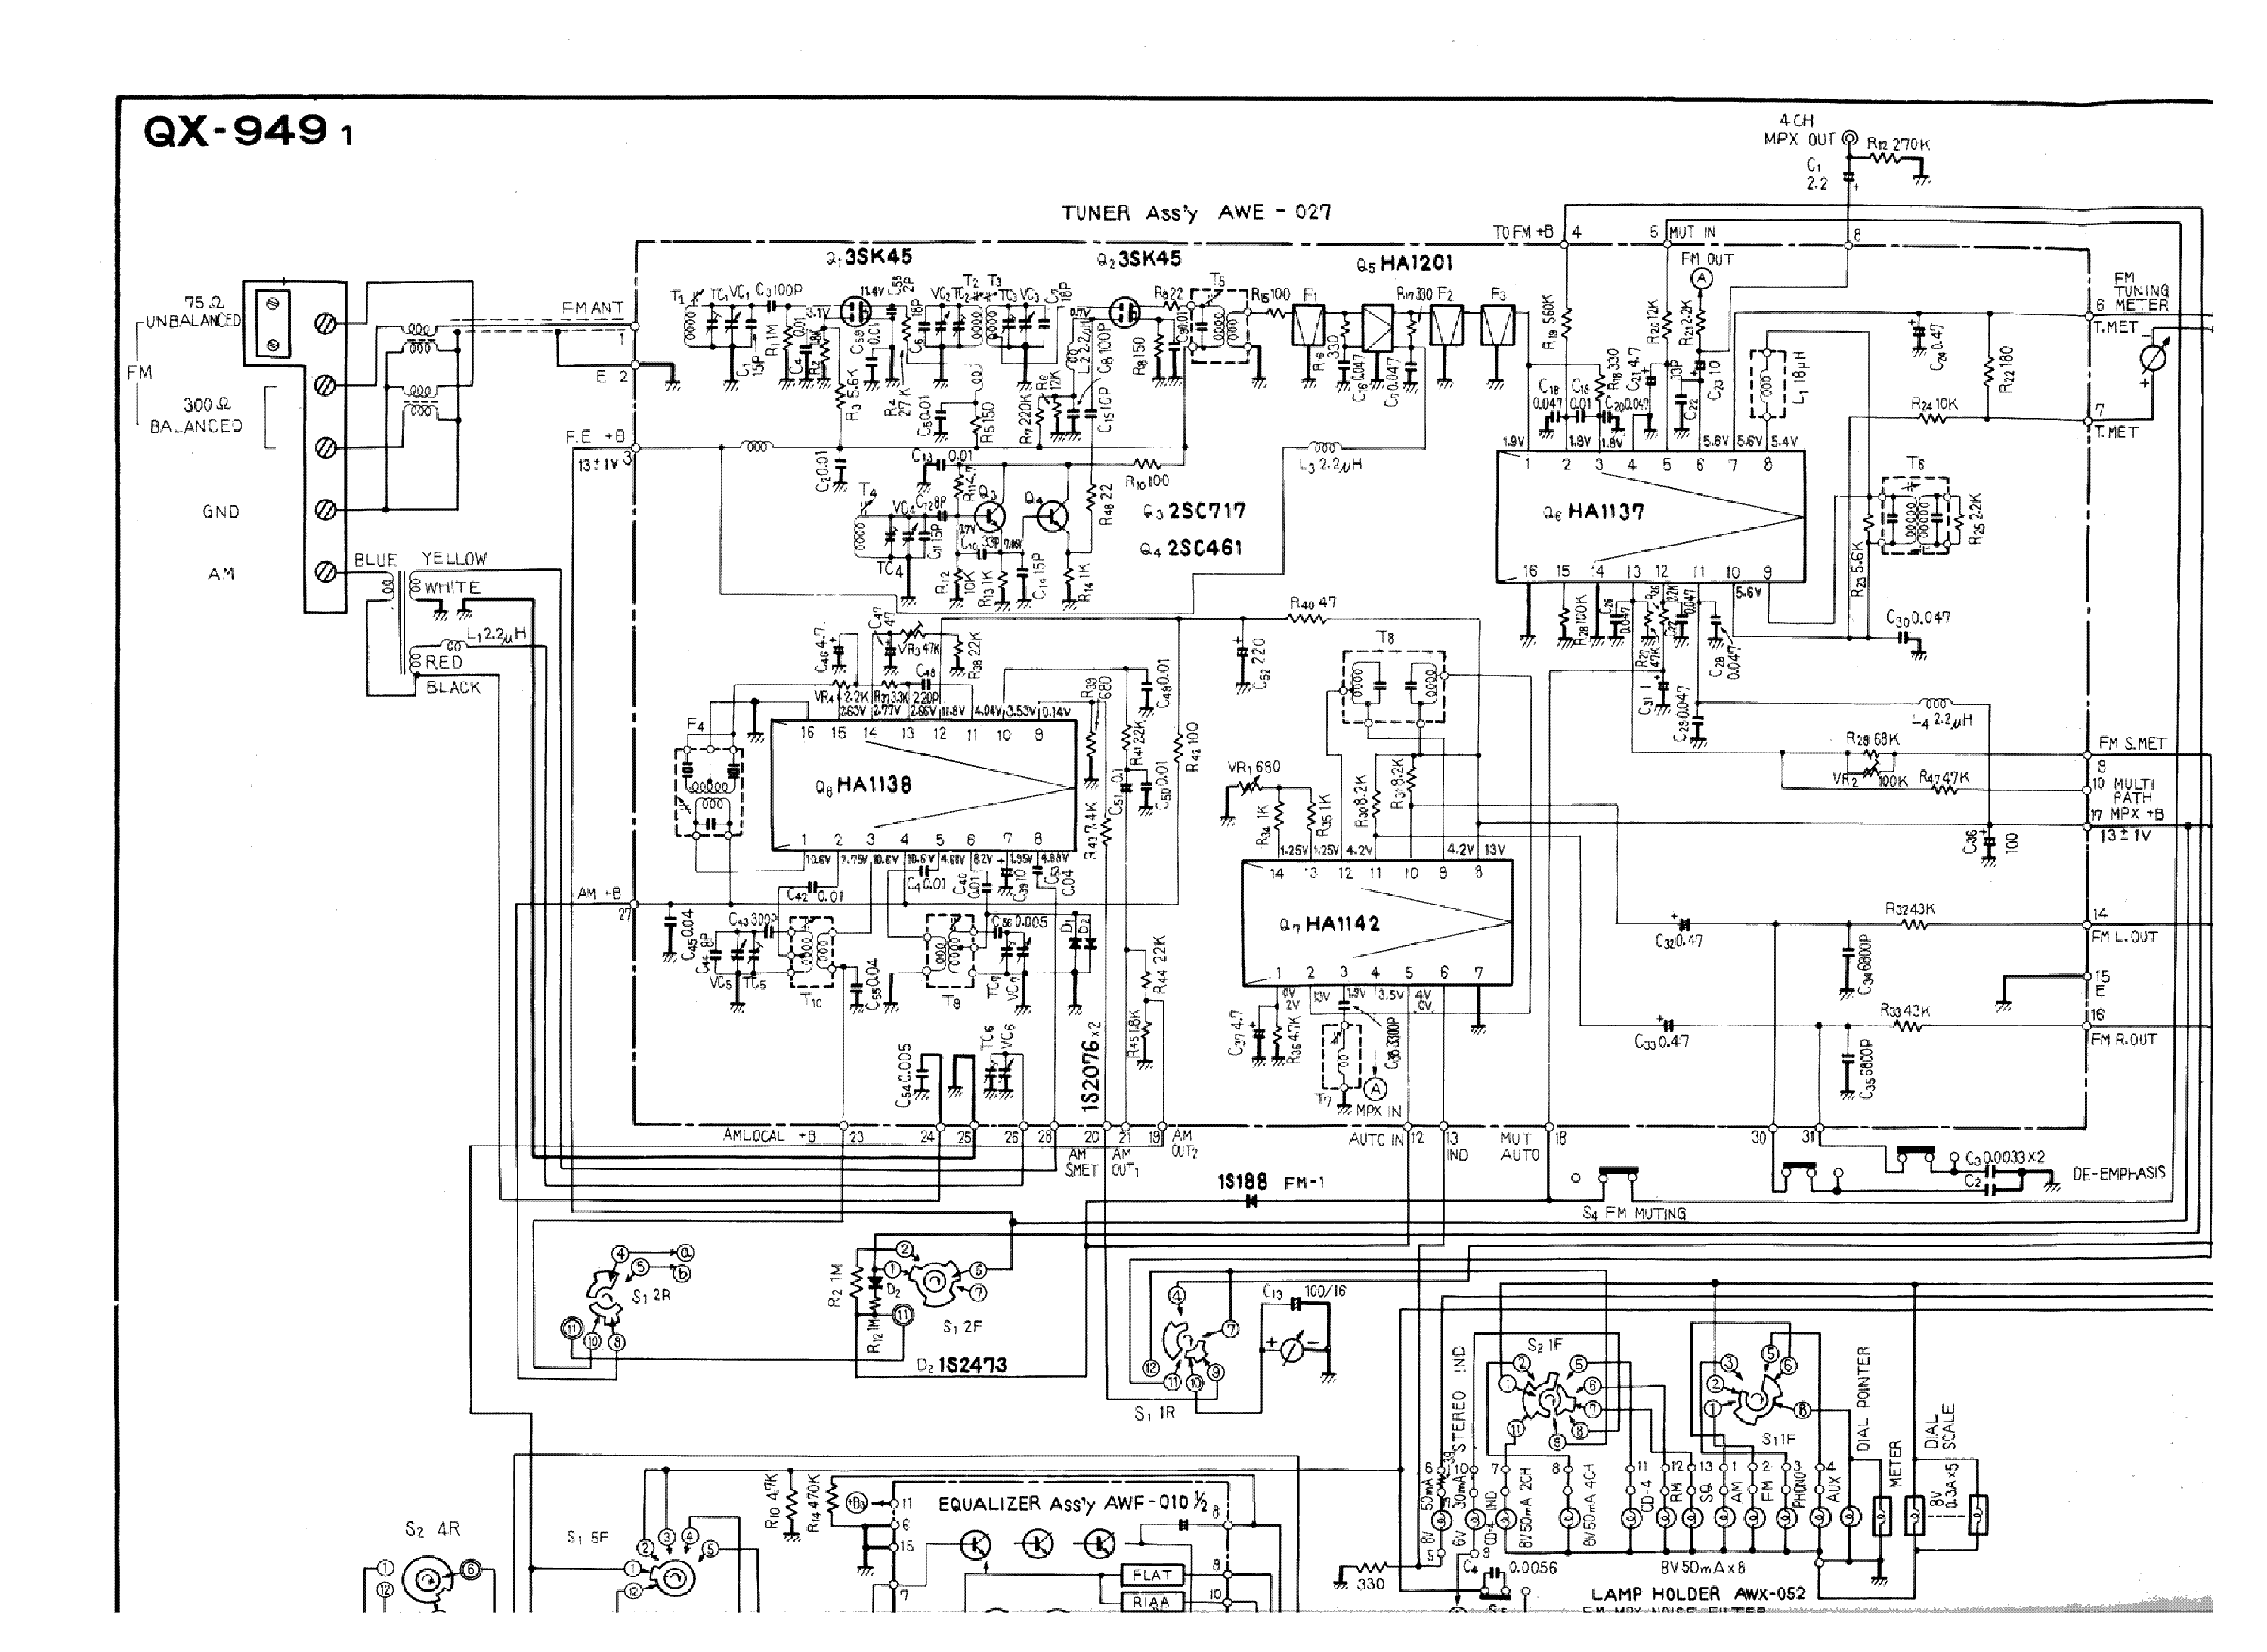 PIONEER QX-949 service manual (2nd page)